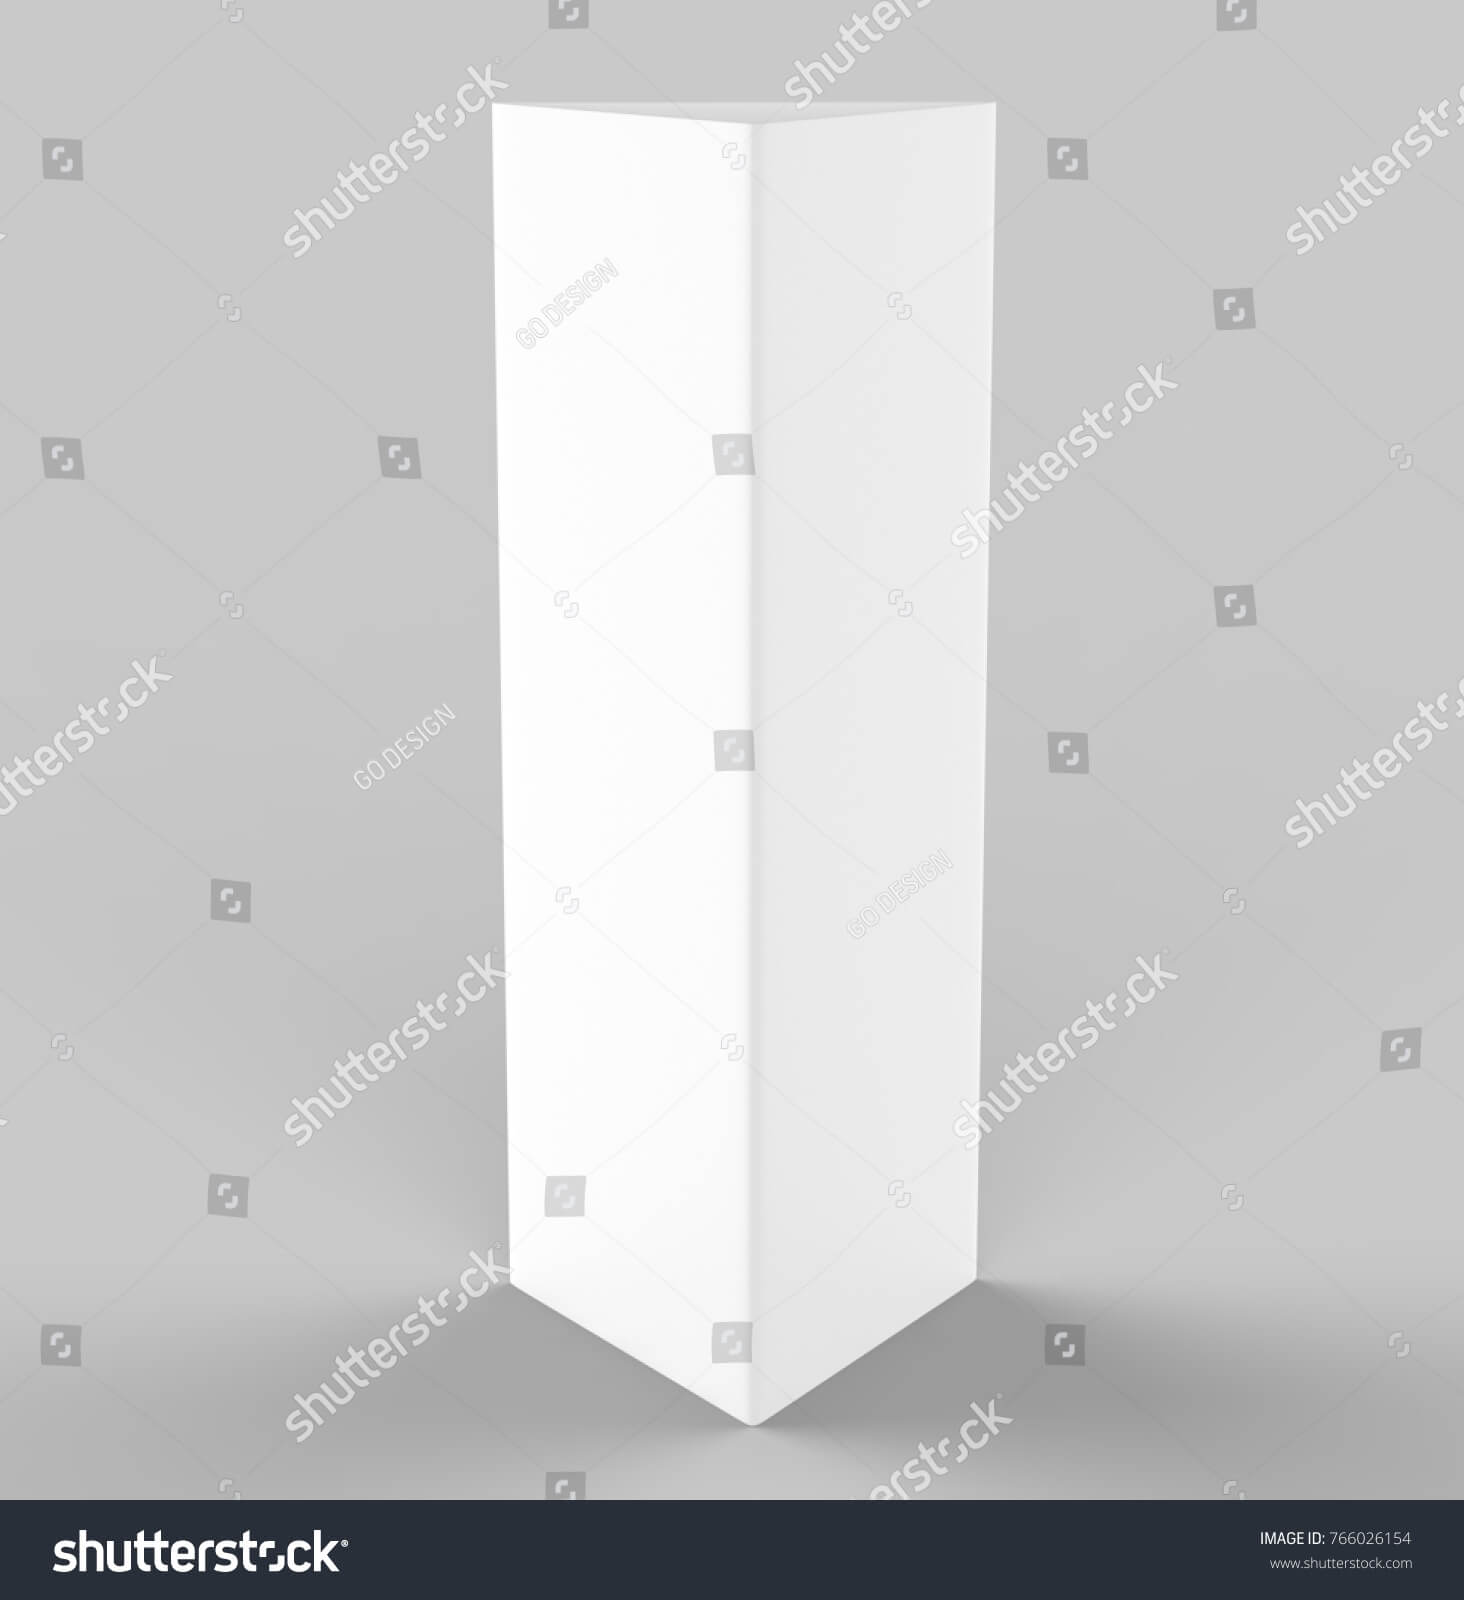 Стоковая Иллюстрация «White Blank Empty Paper Trifold Table With Regard To Tri Fold Tent Card Template